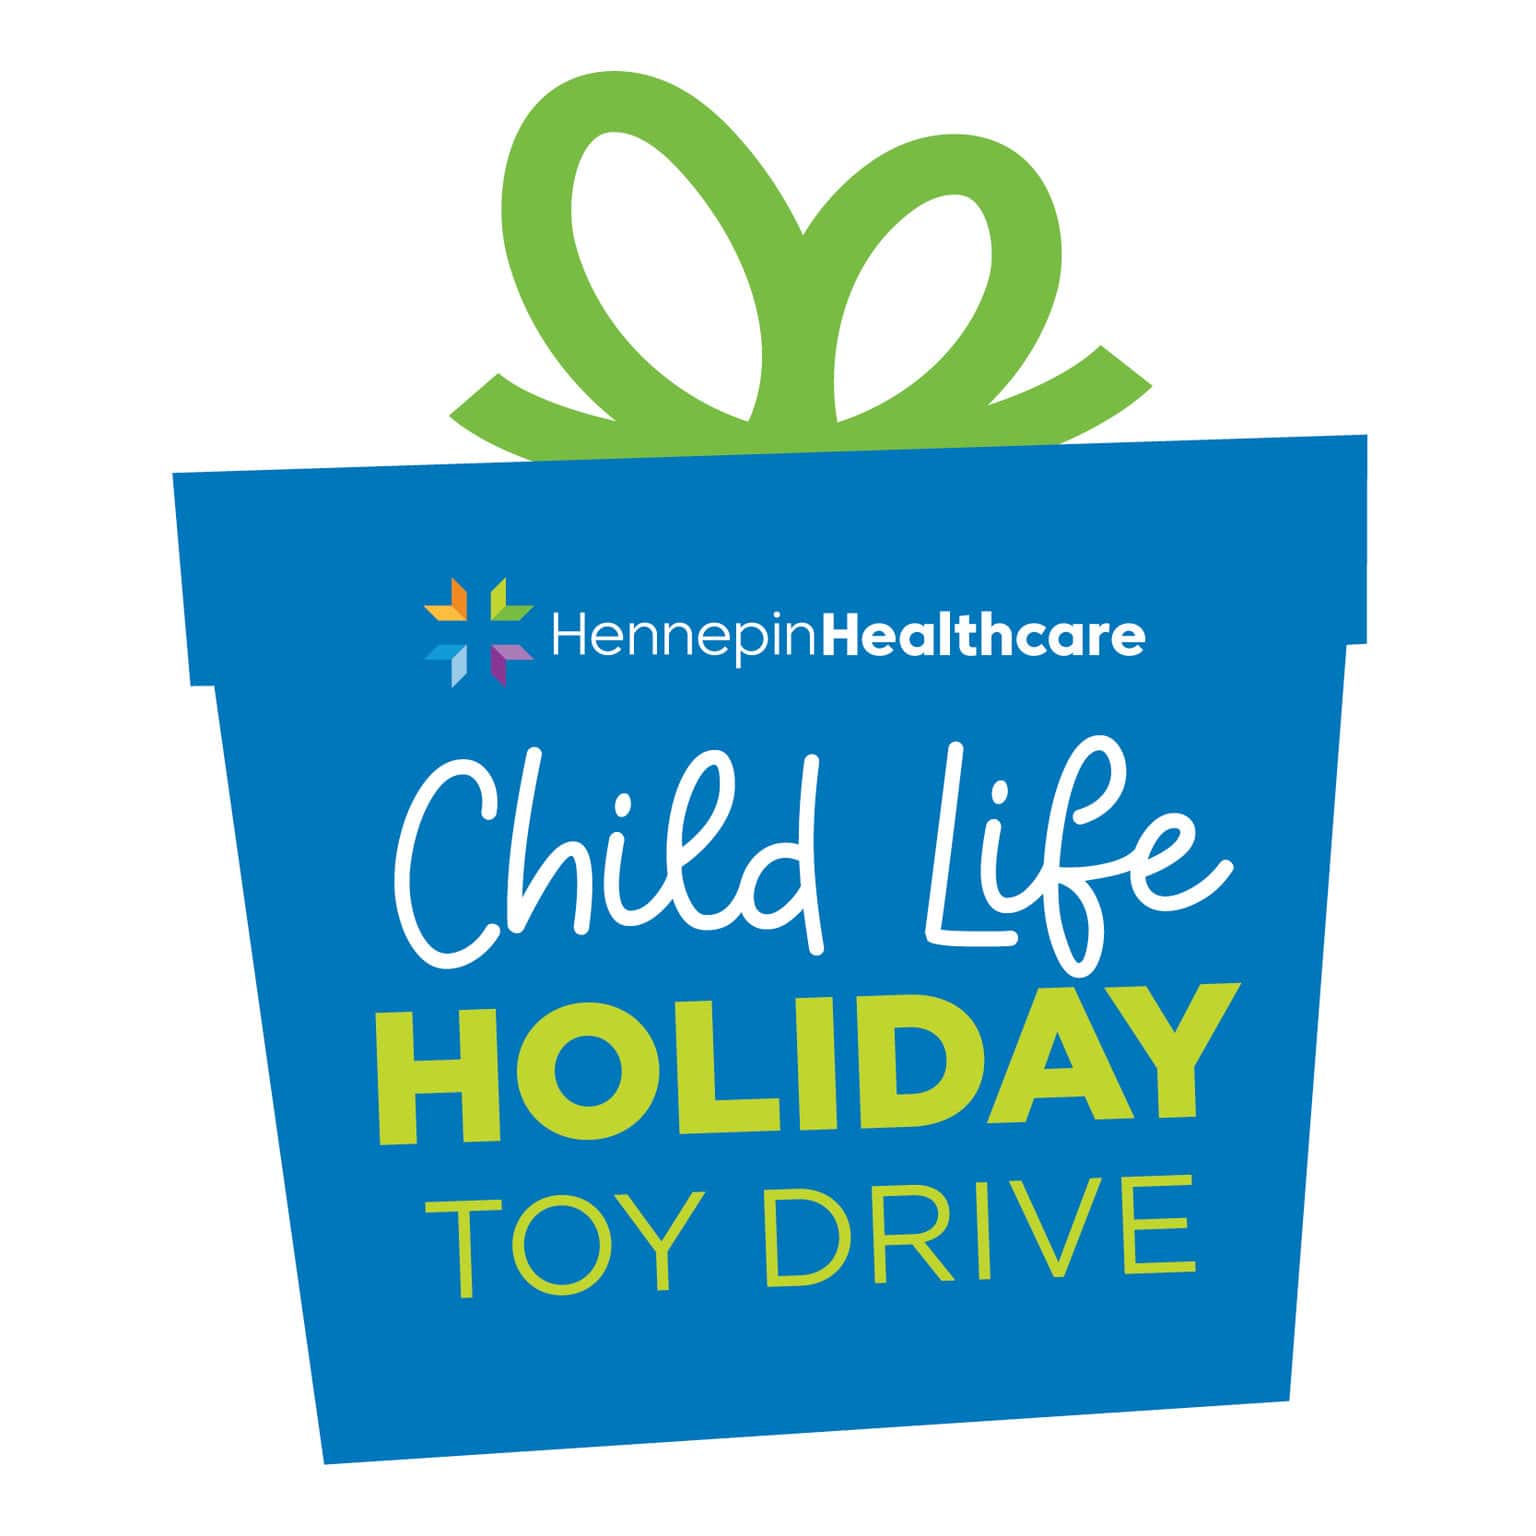 Child Life Toy Drive, child life holiday toy drive, toy drive, donate toys, holiday toy drive, pediatric patient toy drive